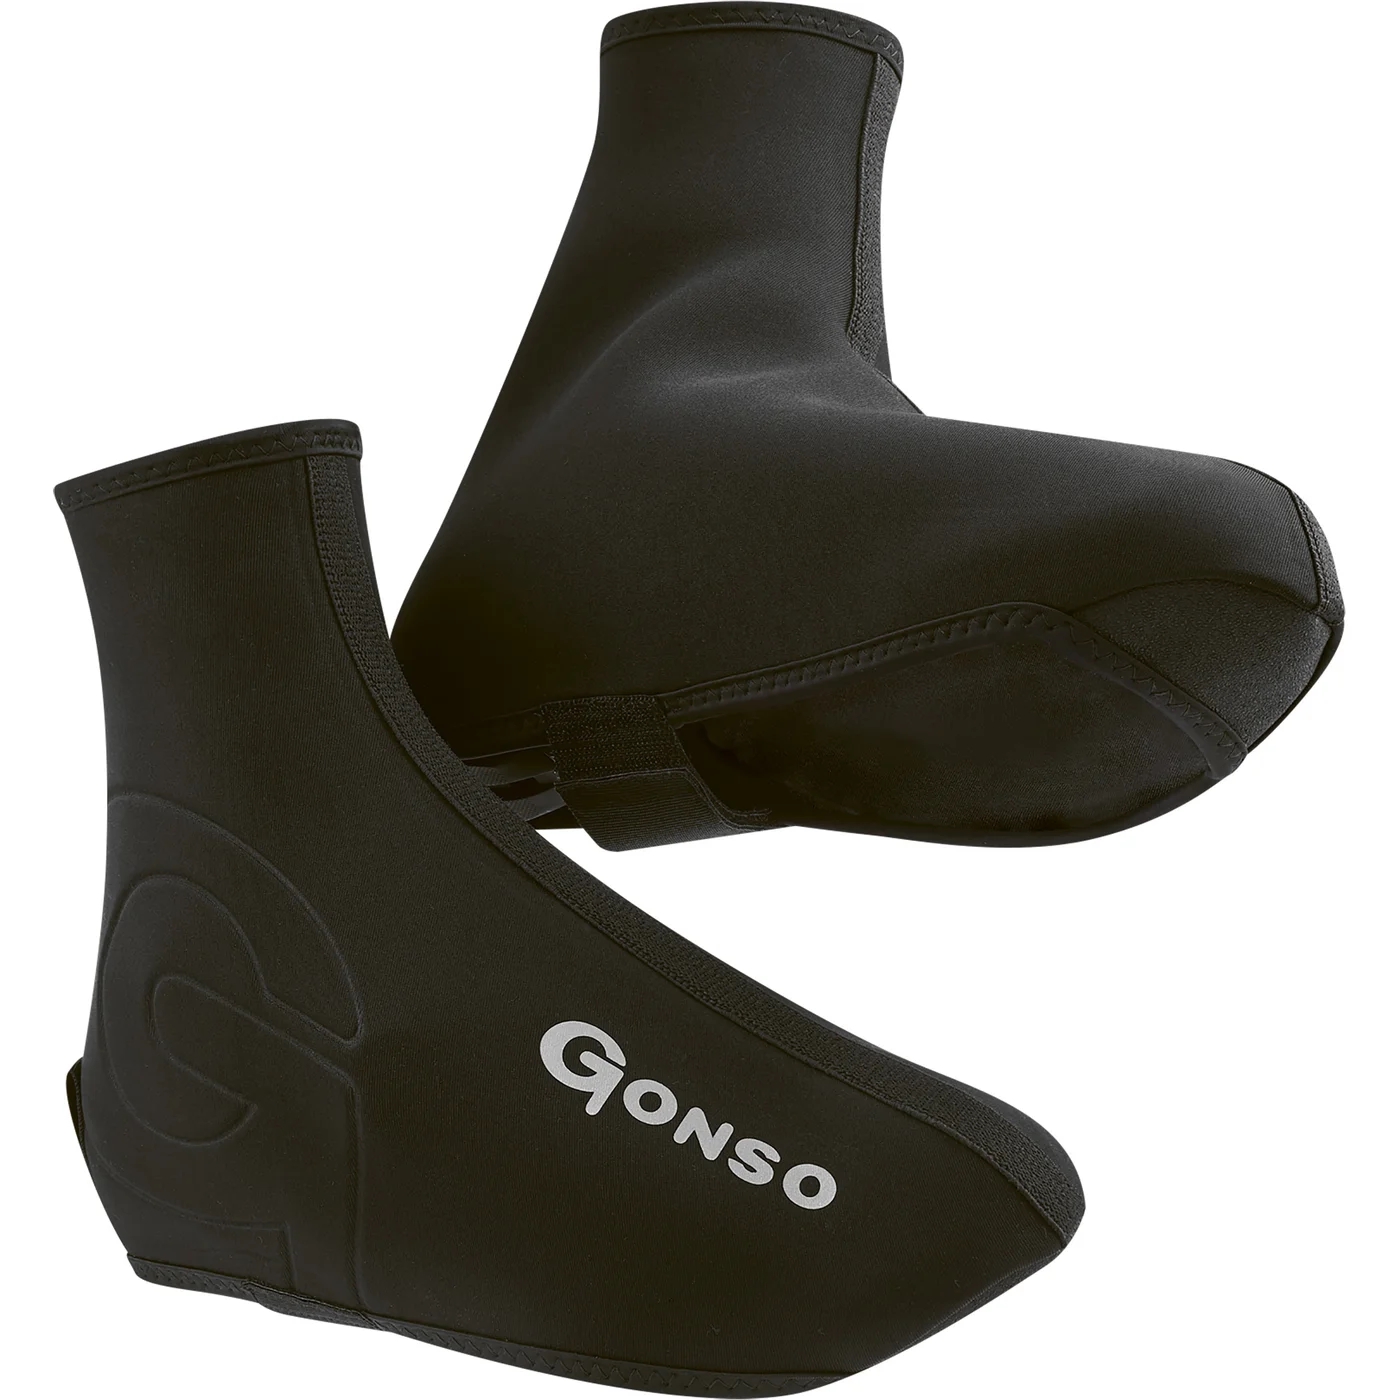 GONSO THERMO I THER-UEBERSCHUH Black 5HR49uHR